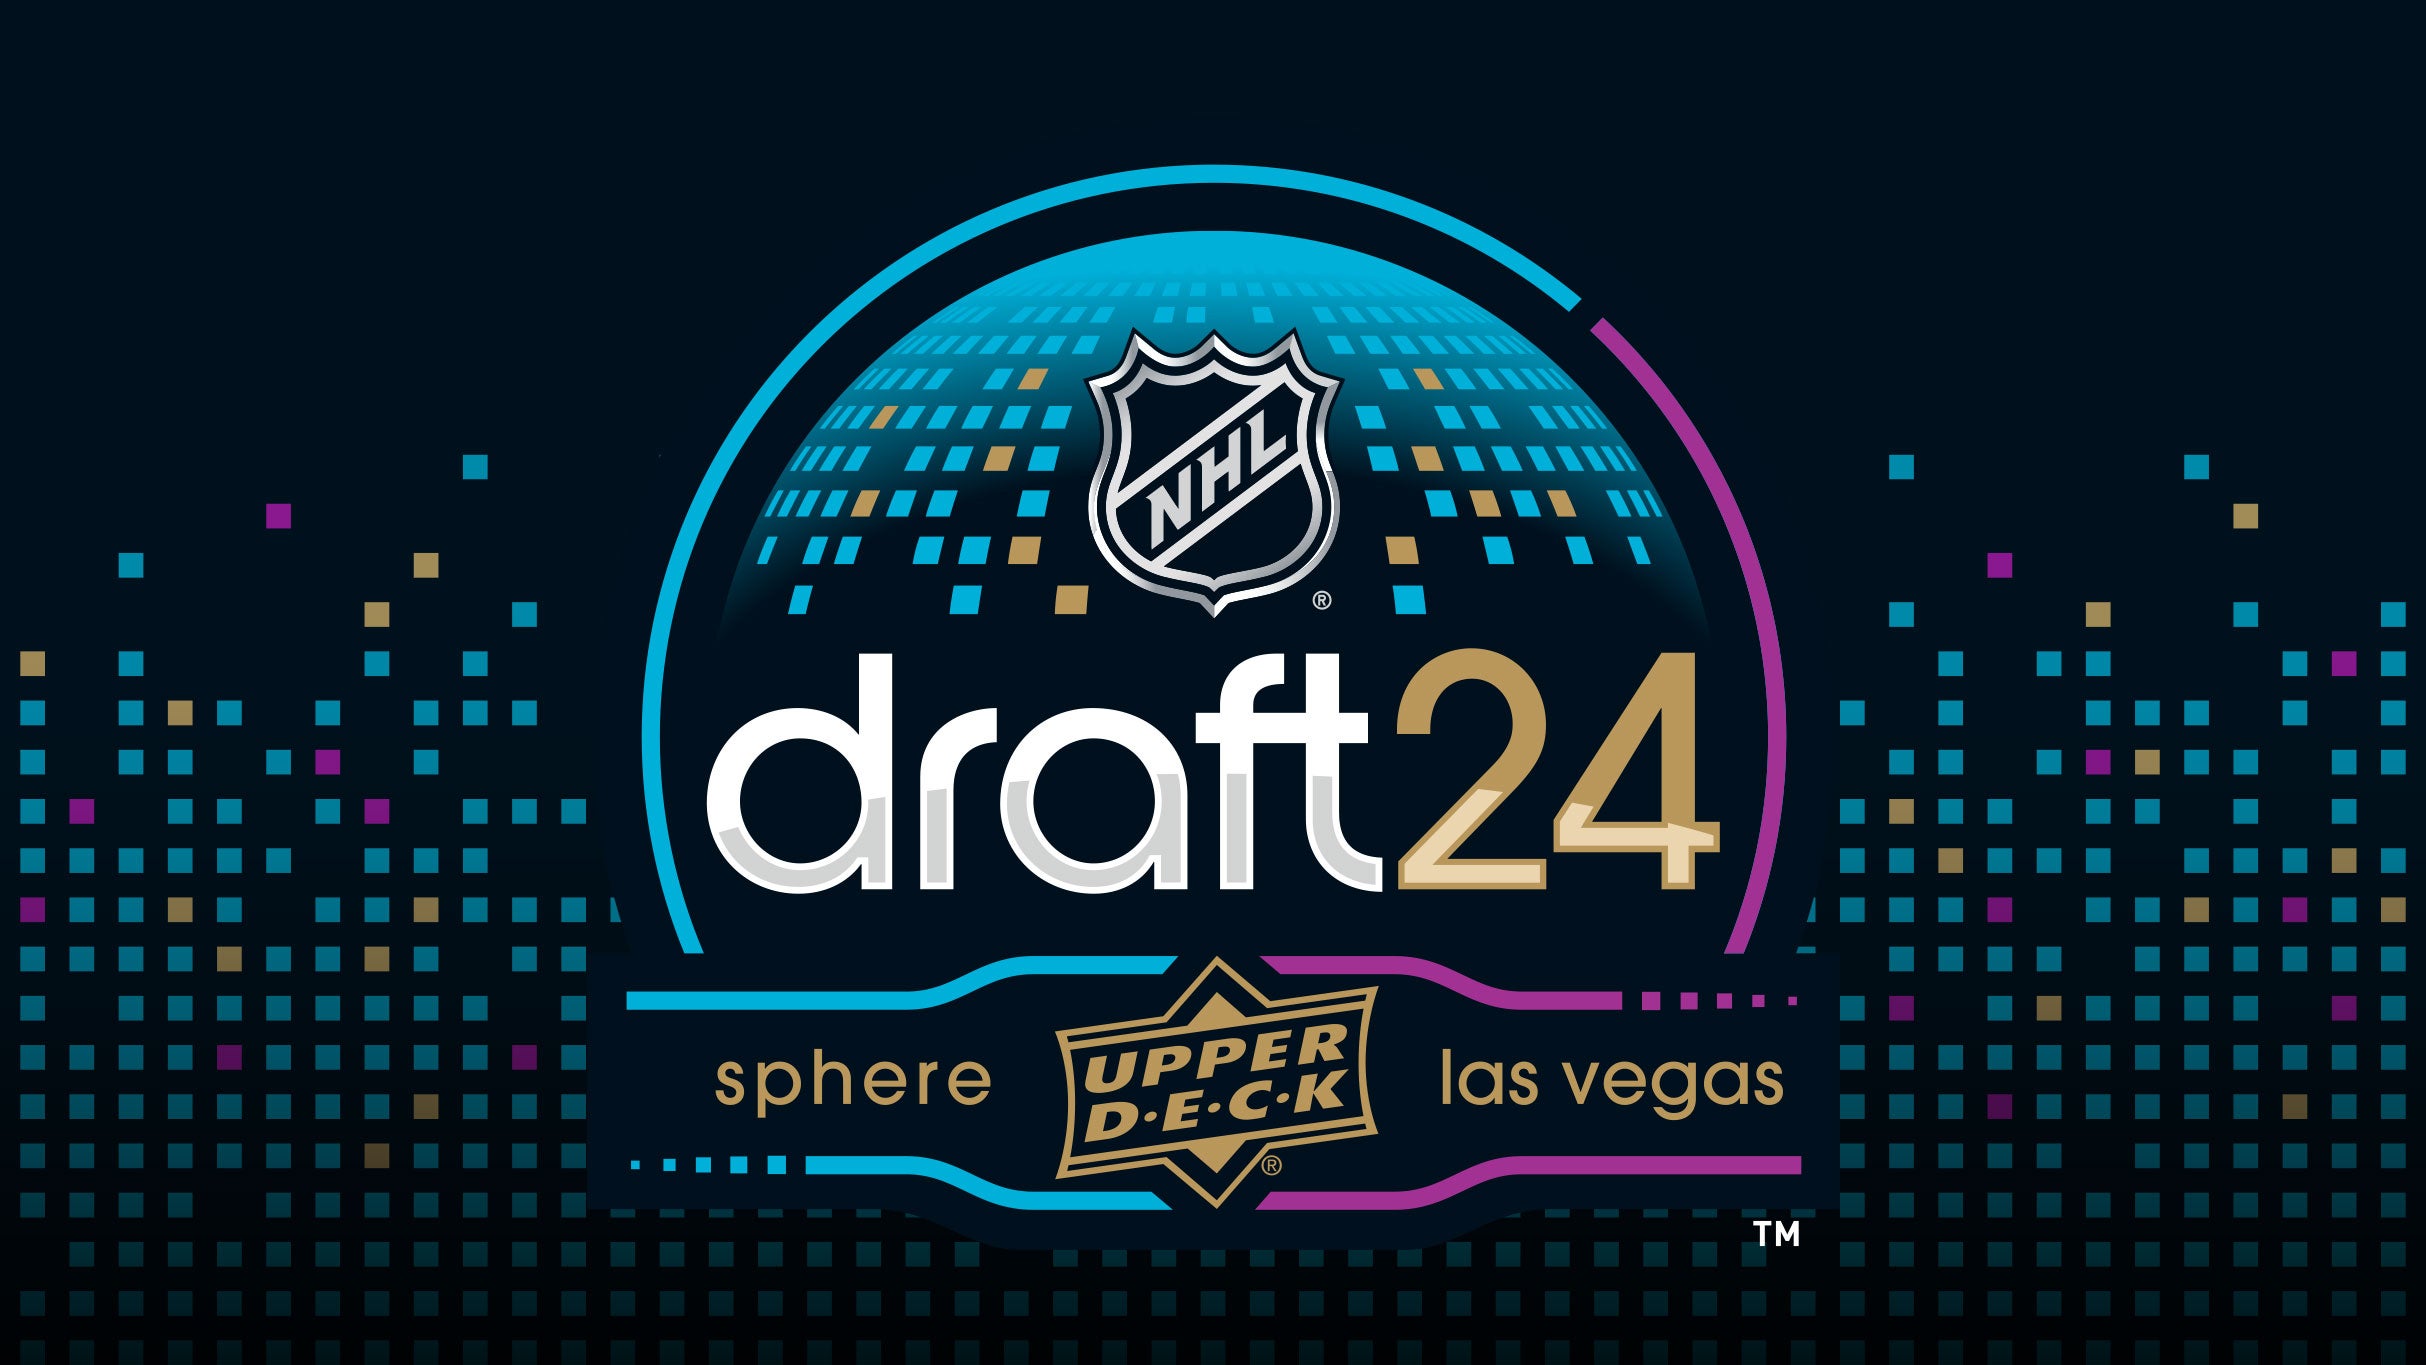 2024 Upper Deck NHL Draft? Rounds 2-7 at Sphere